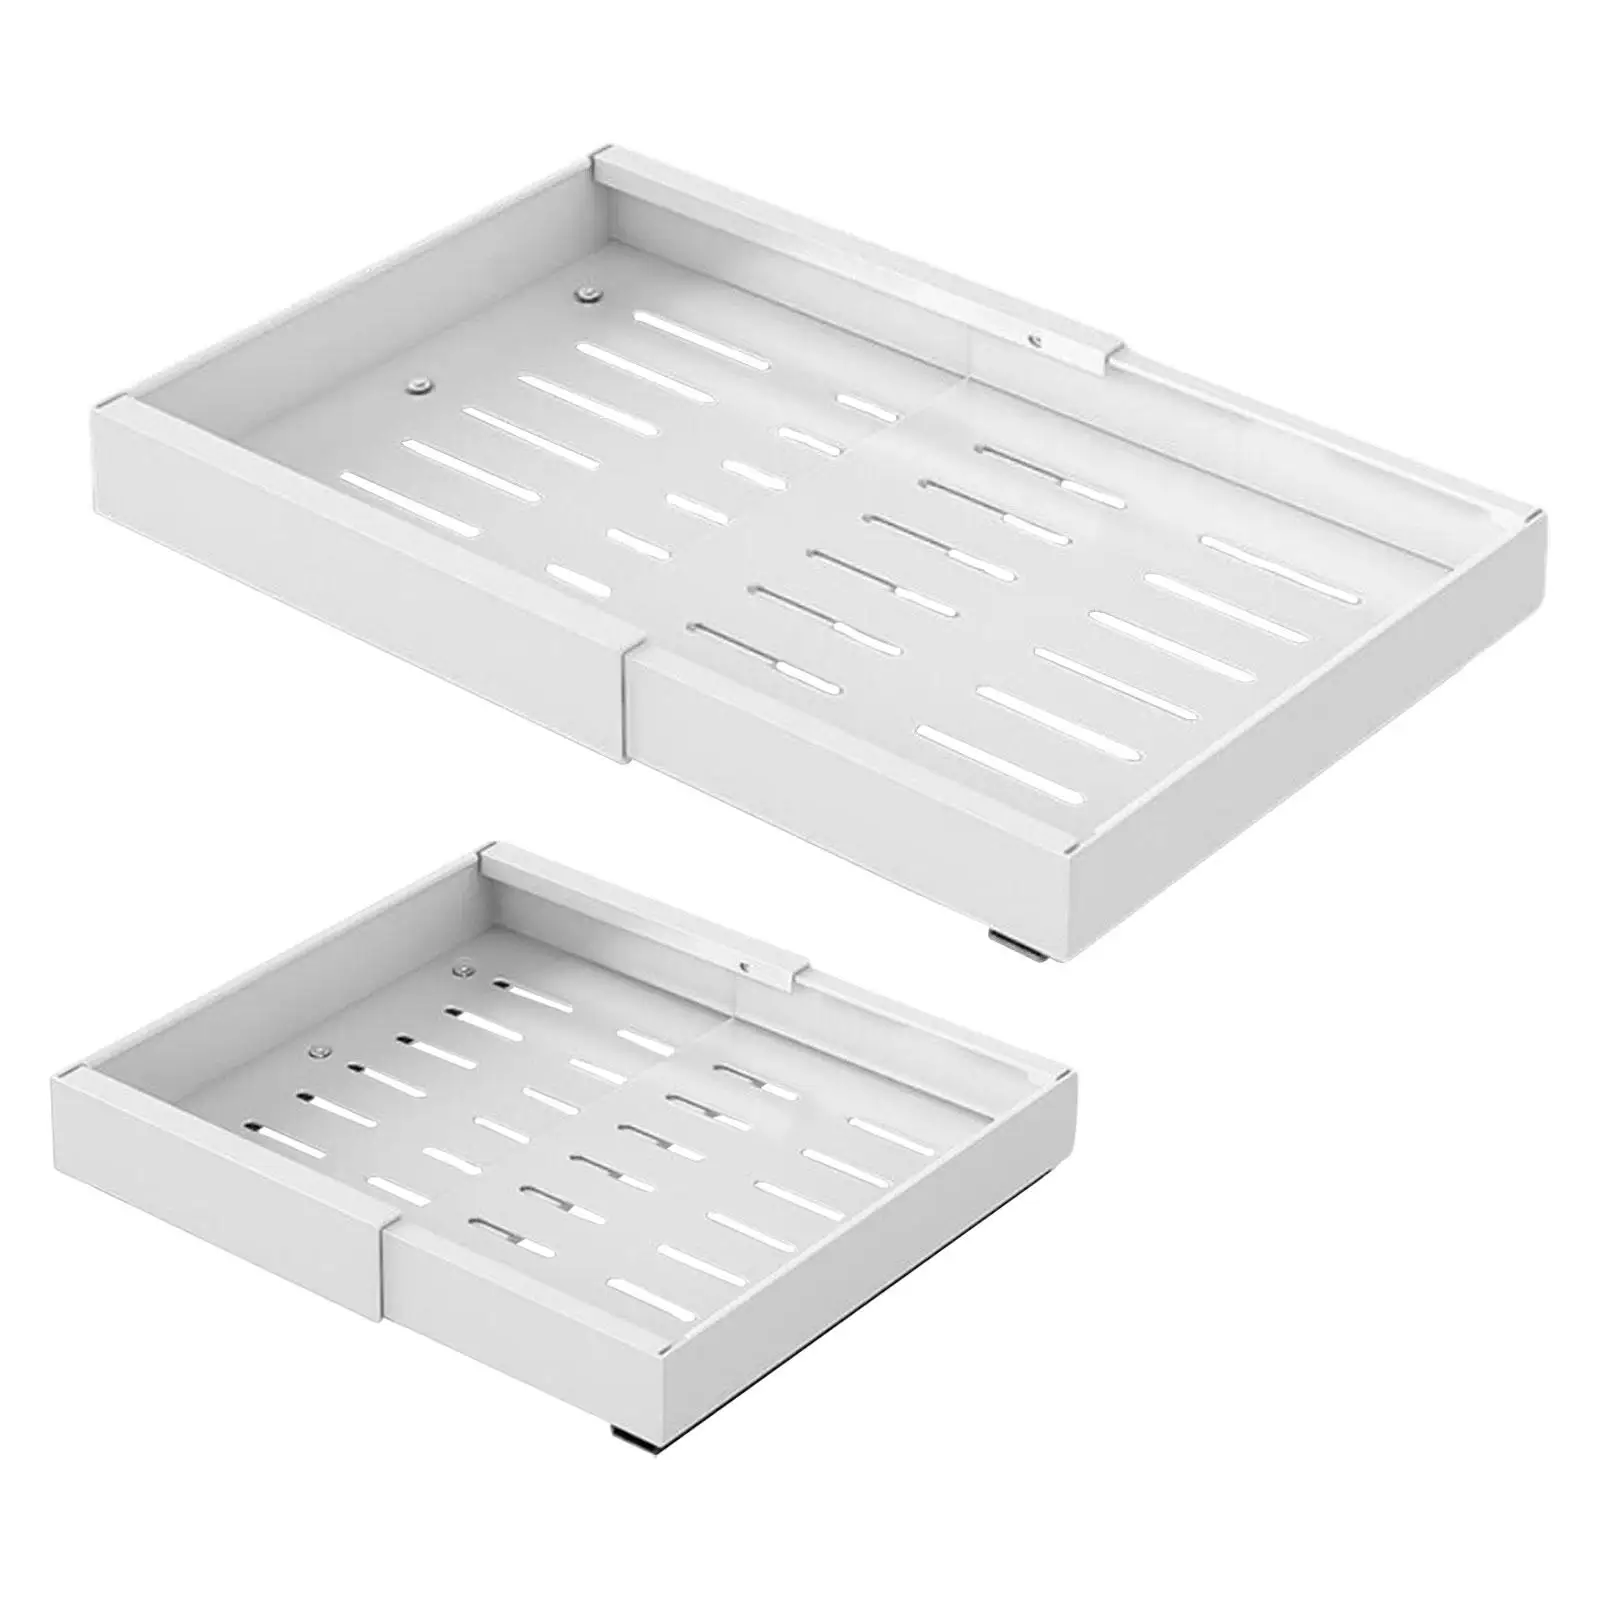 

Expandable Drawer Organizer Pull Out Cabinet Organizer for Bathroom Pantry Under Cabinet Cupboard Small Kitchen Appliances